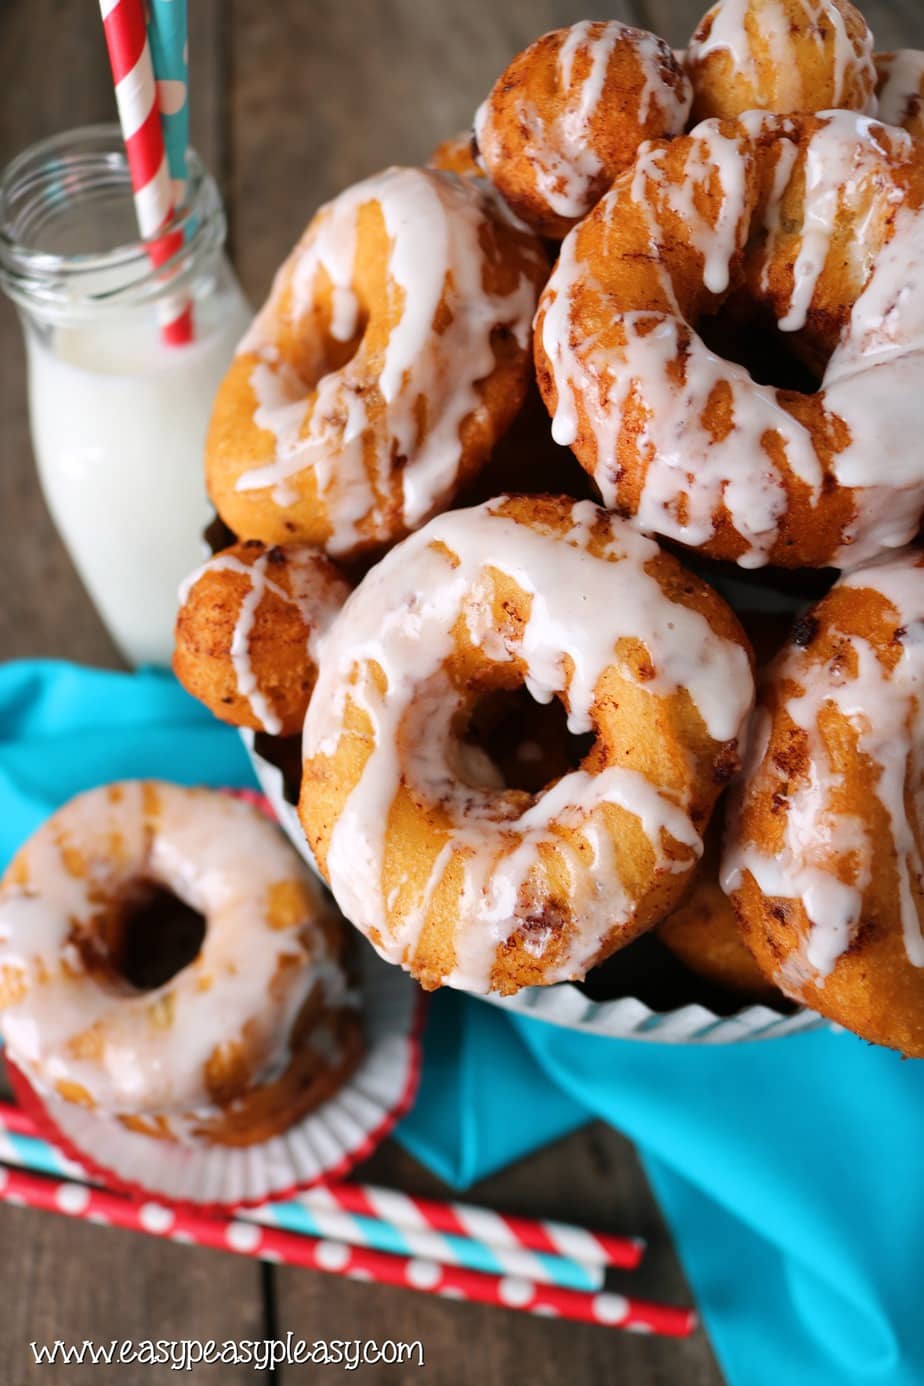 You will have breakfast ready in a flash with these super easy 2 ingredient cinnamon roll donuts.